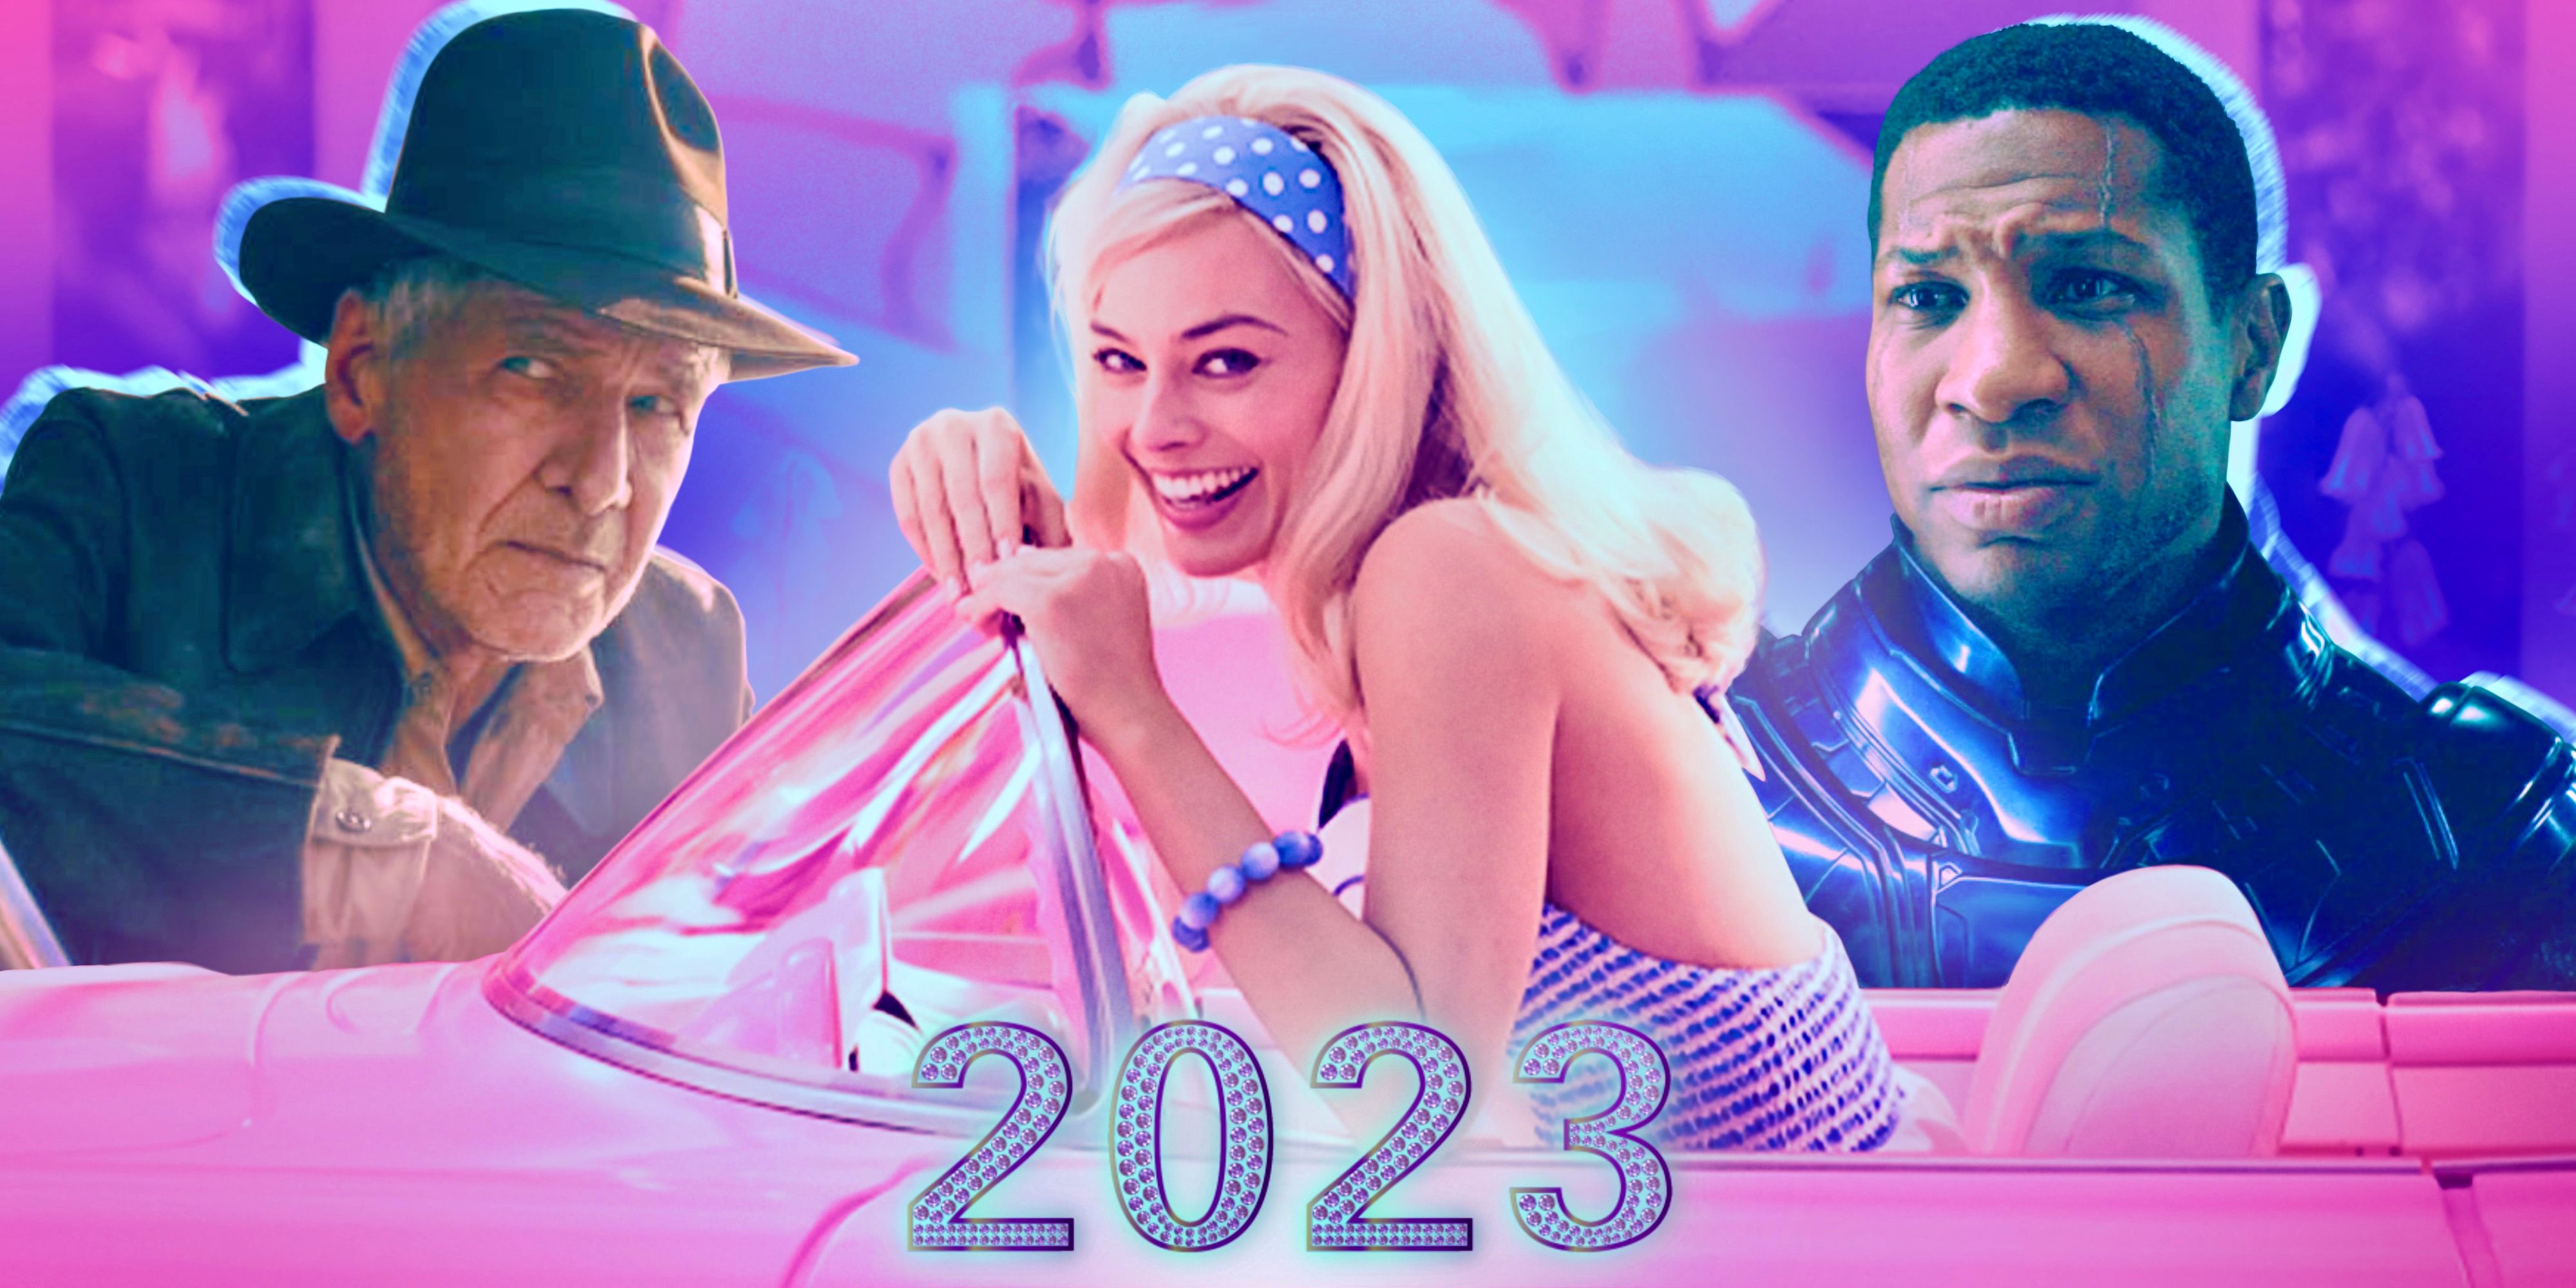 The 10 Most Anticipated Movies Of 2023, According To Letterboxd